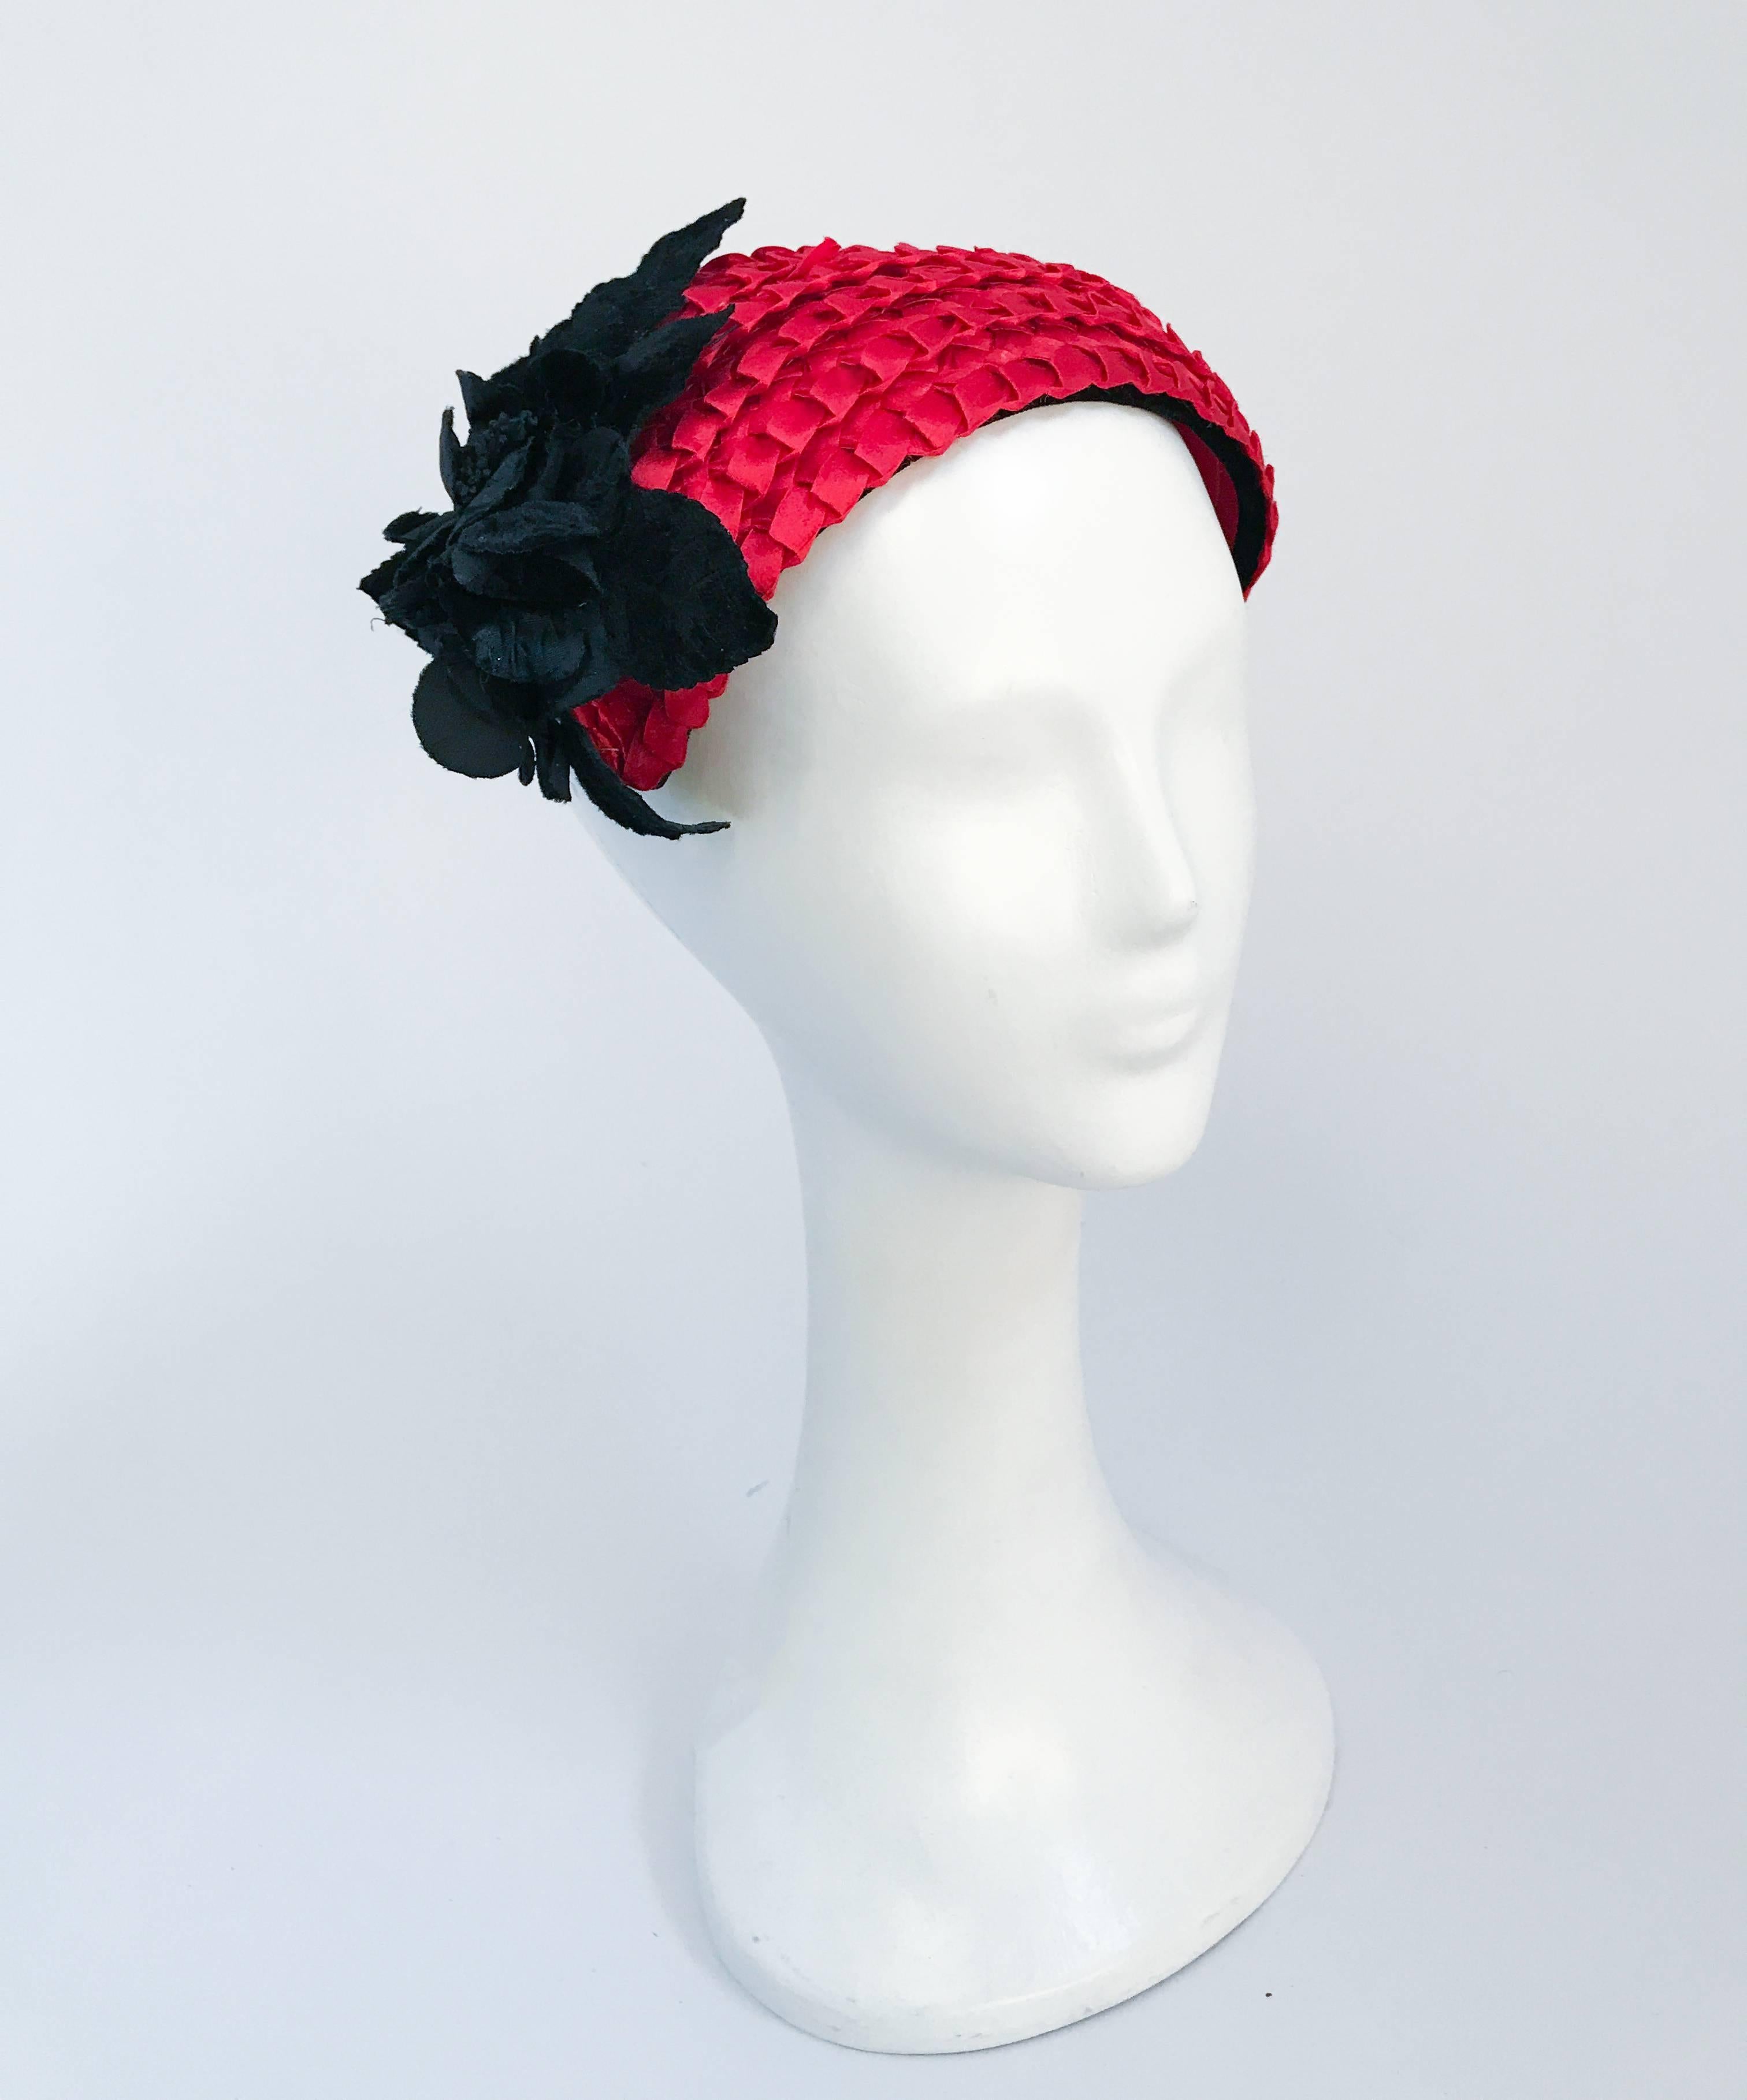 1950's Red Woven Straw Cocktail Hat with Black Velvet Flower. Red woven straw cocktail hat with black velvet trim and flower accent. Open-sized.